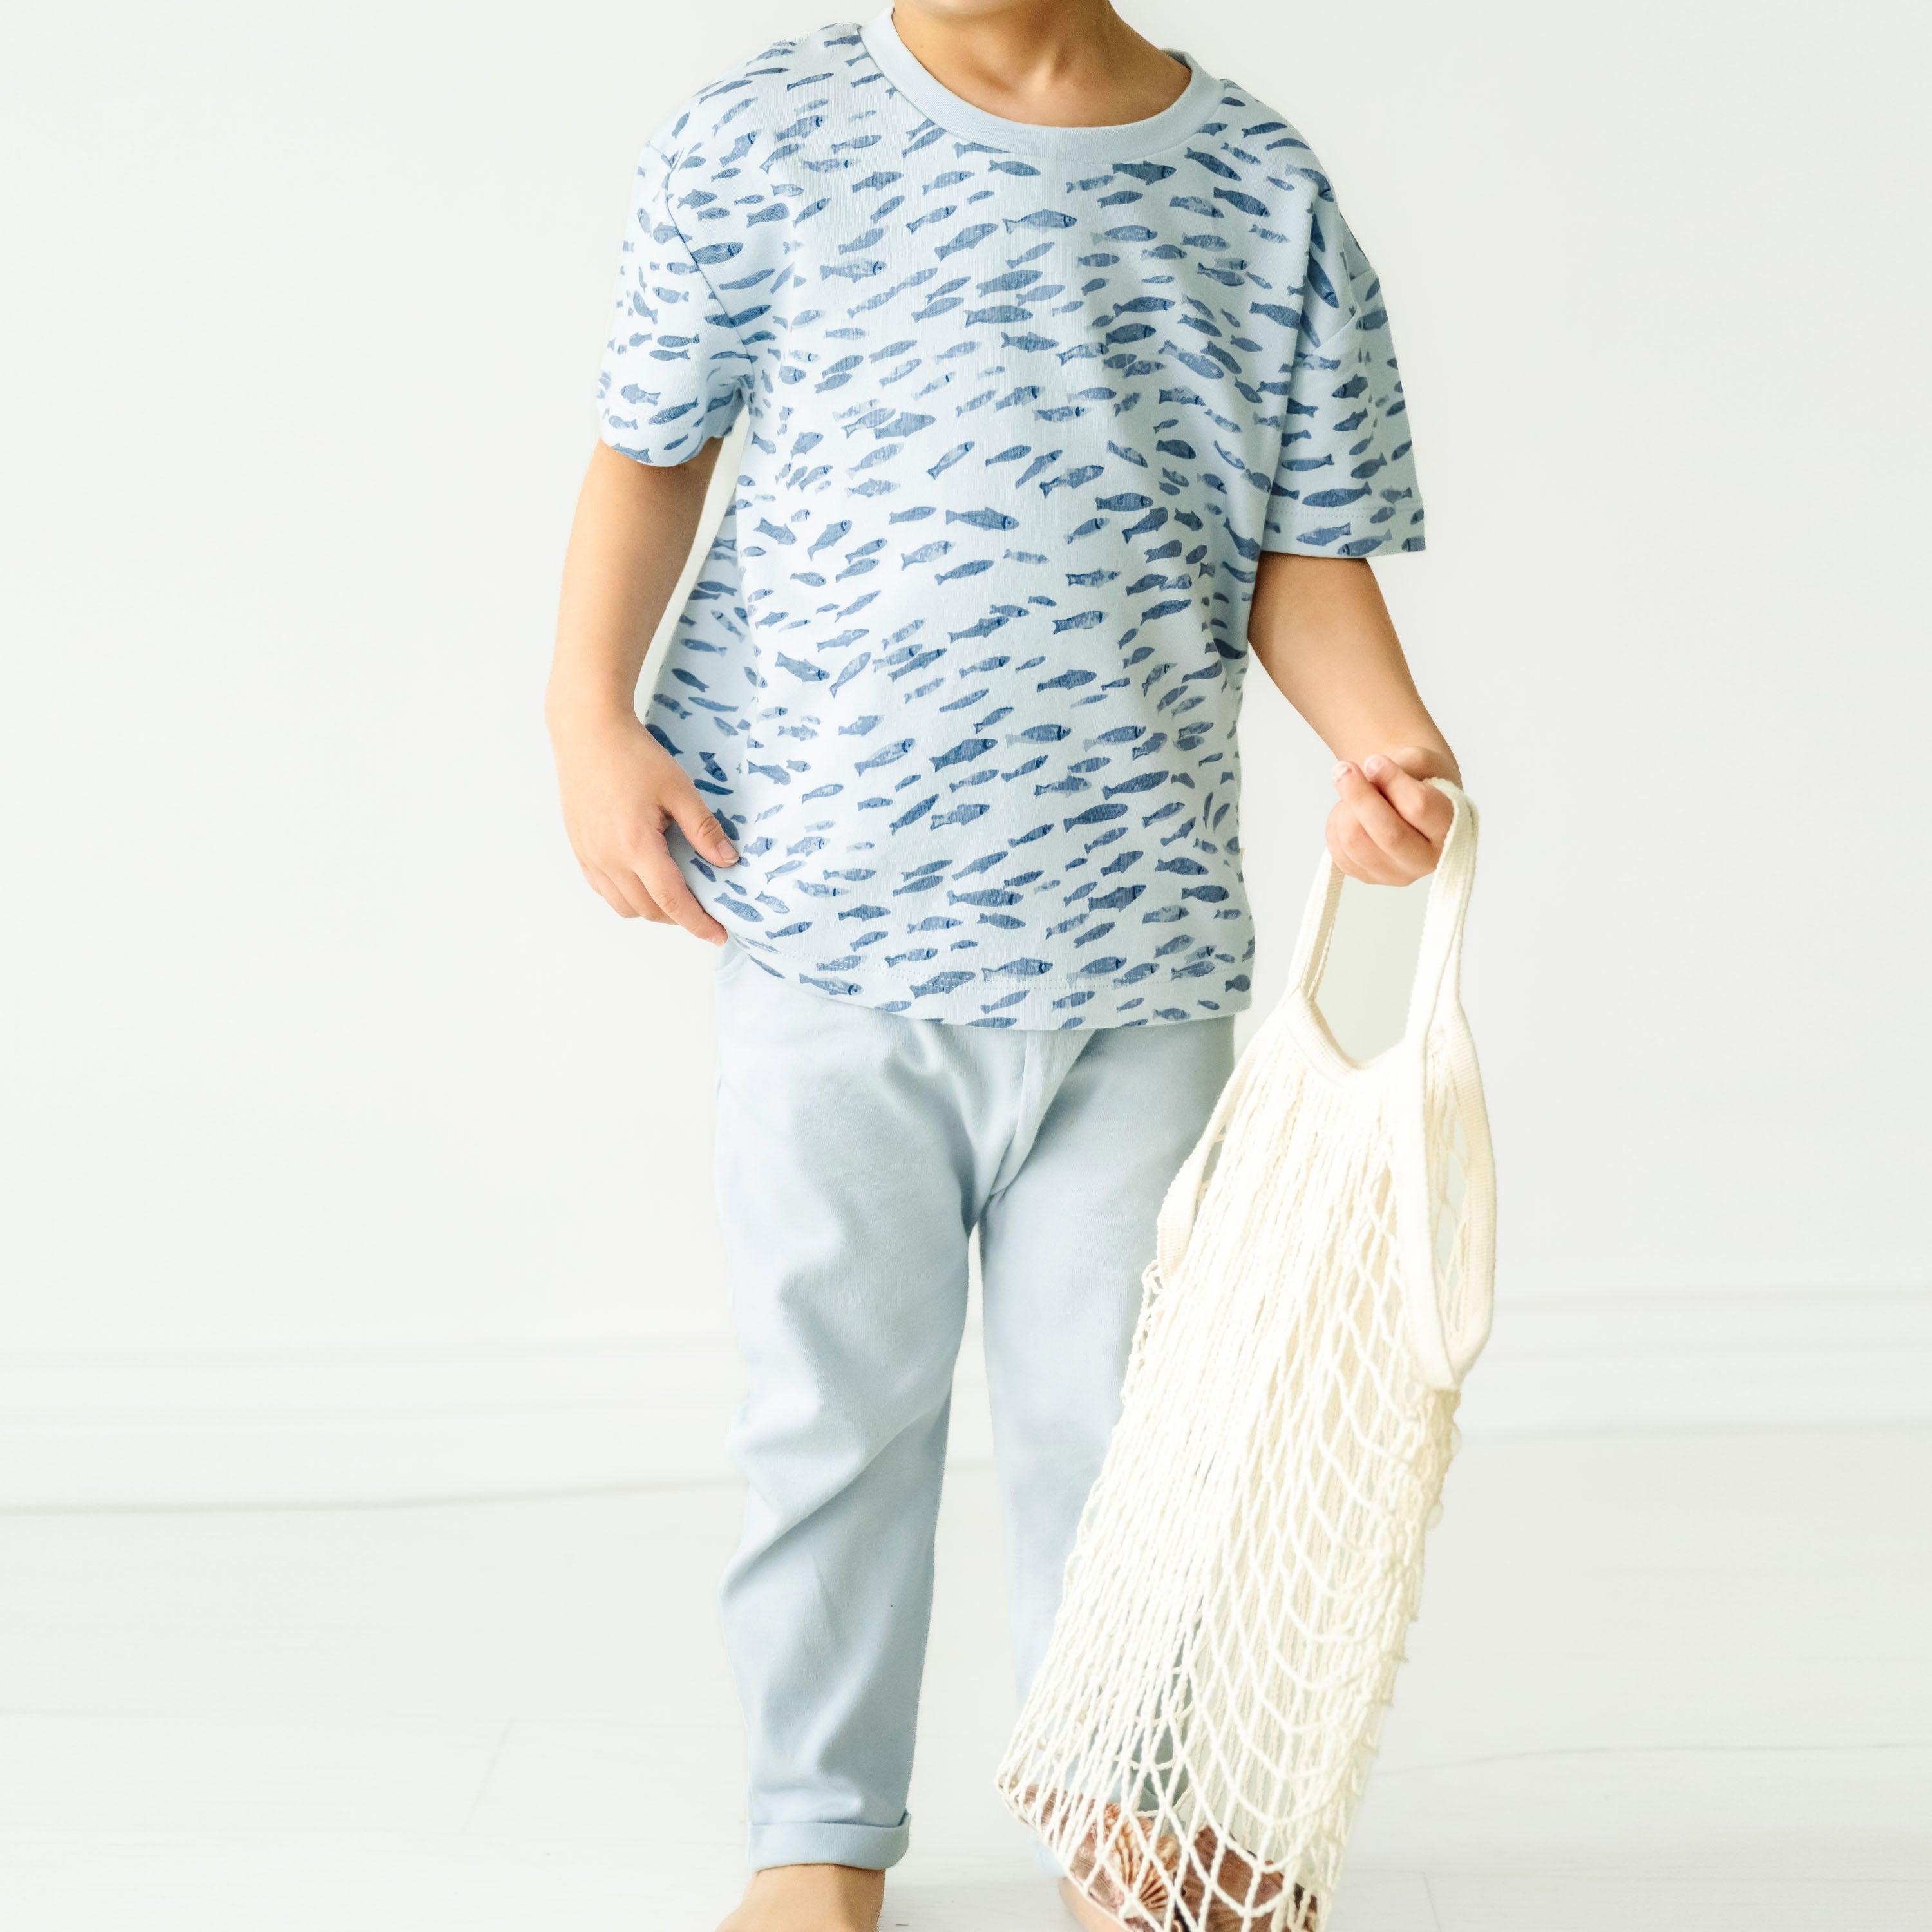 A child in casual blue attire, holding an empty white mesh bag, standing in front of a plain white background. only the torso and legs of the child are visible wearing an Organic Tee & Pants Set by Minnow from Makemake Organics.